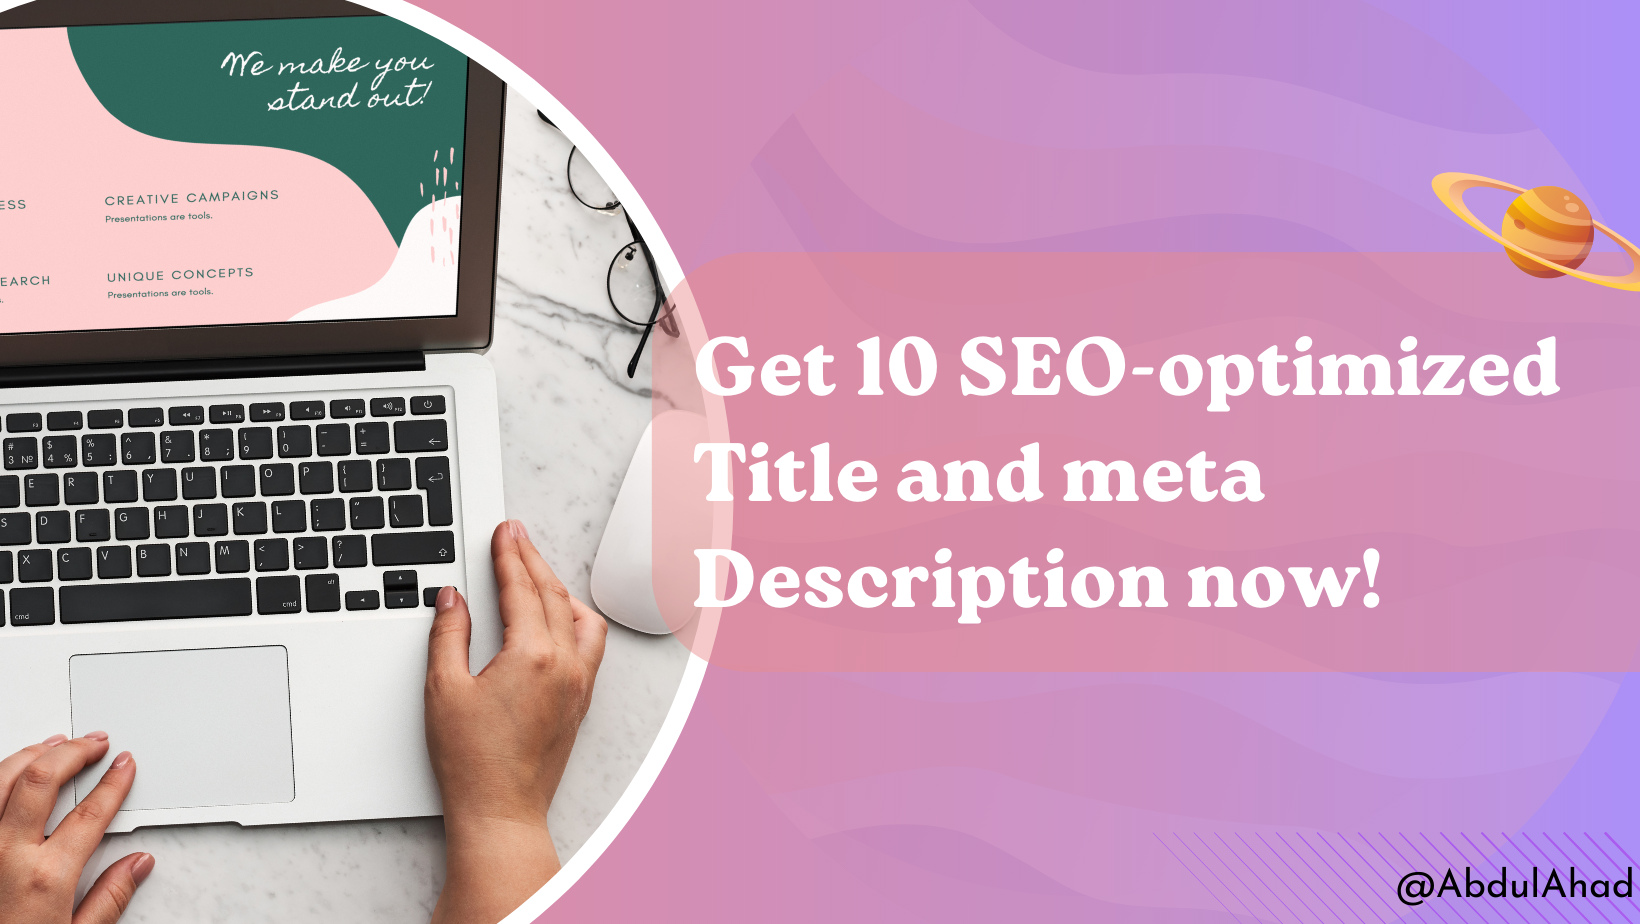 I will write 10 SEO-friendly title and meta description for your website